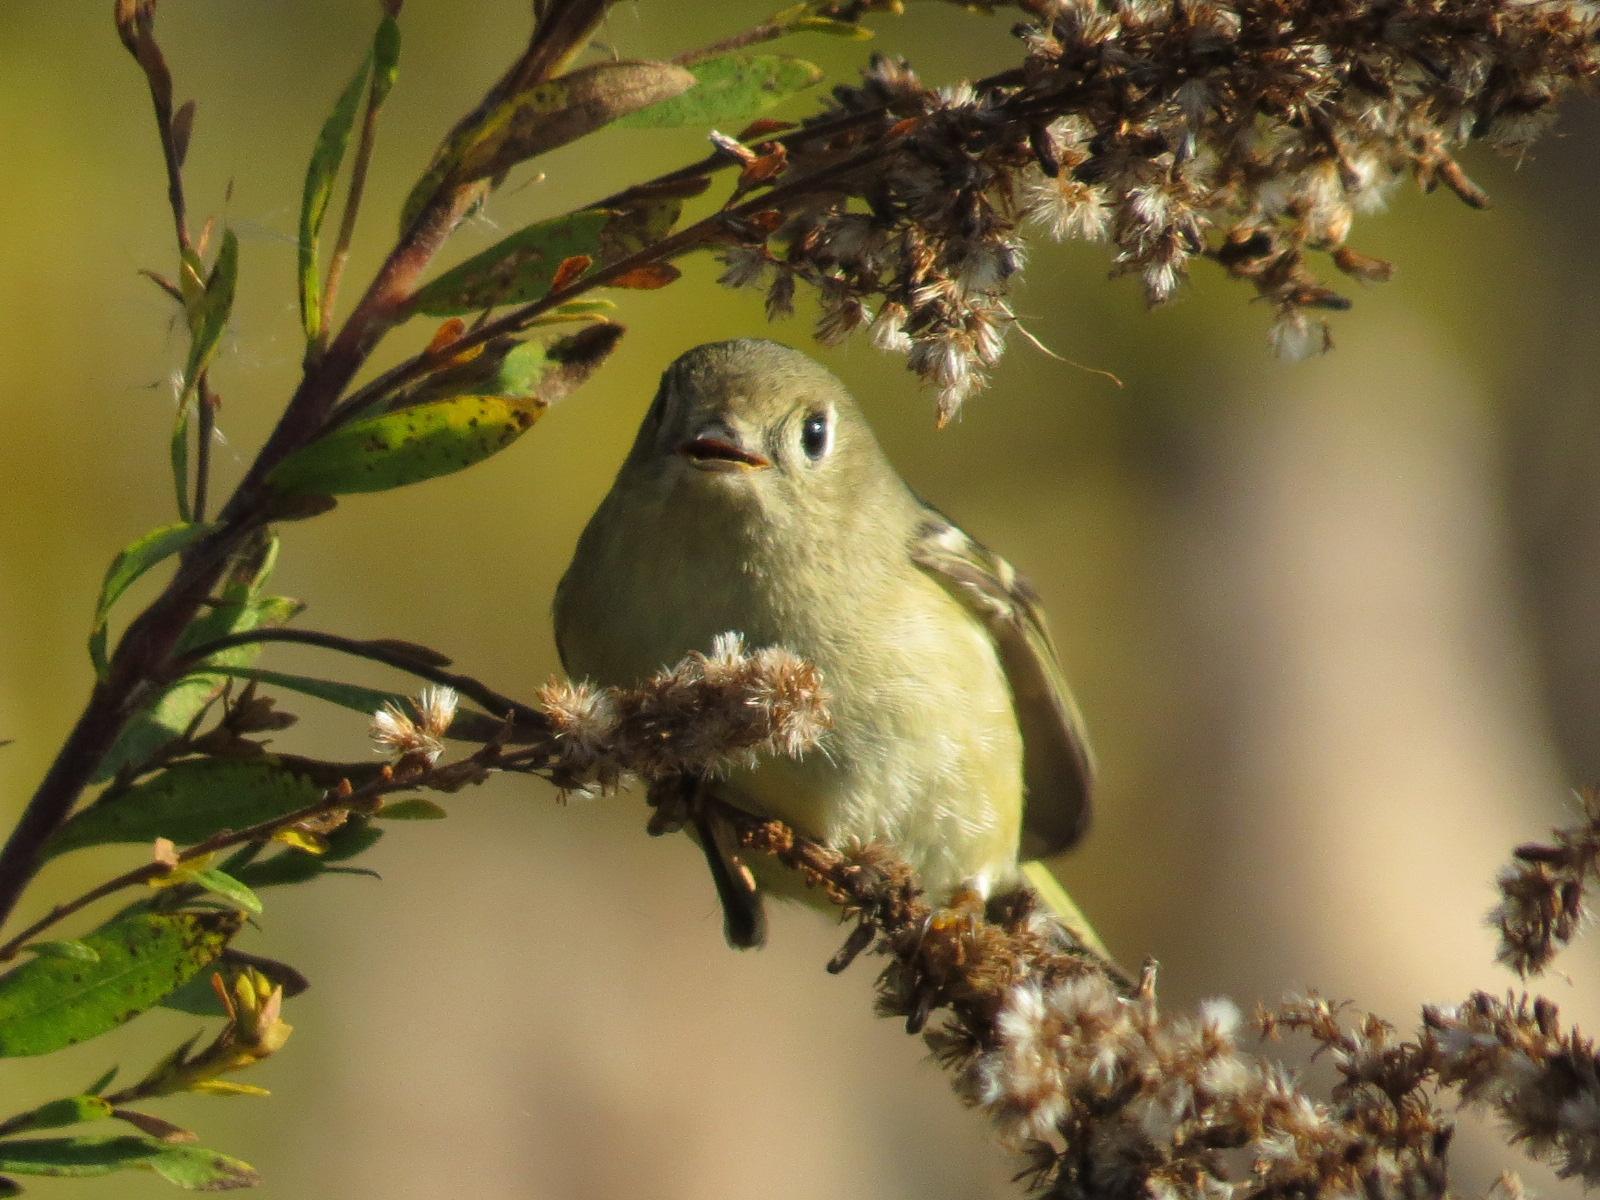 Ruby-crowned Kinglet Photo by Kathy Wooding